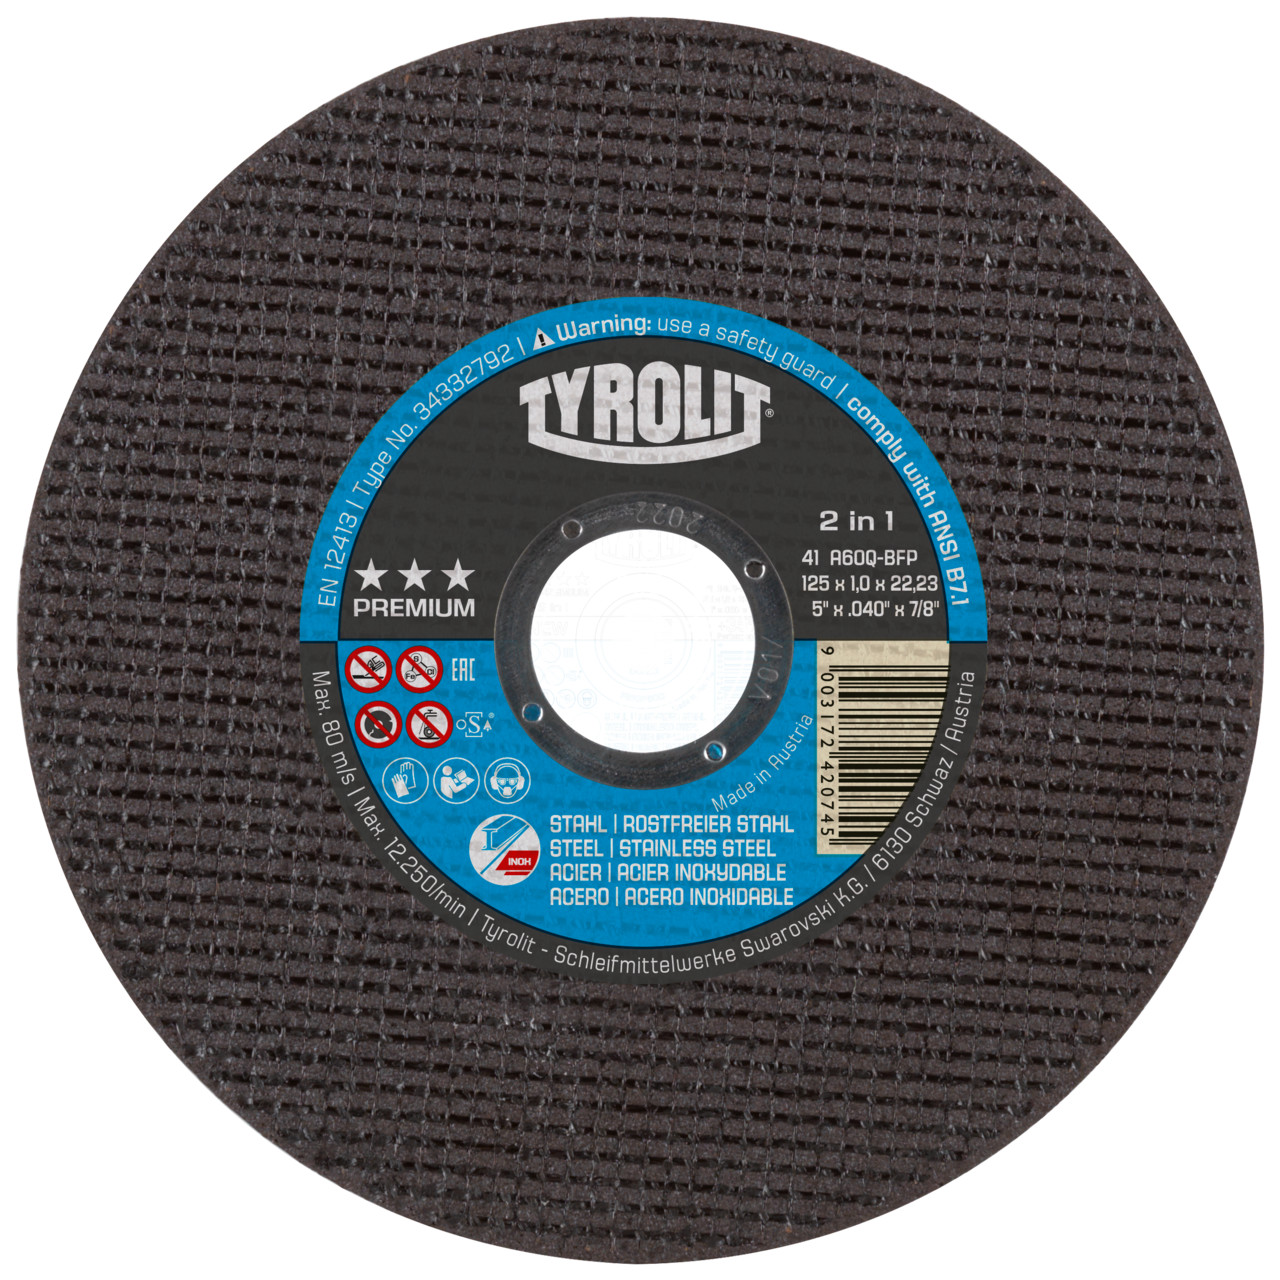 TYROLIT cut-off wheels DxUxH 230x3.5x22.23 2in1 for steel and stainless steel, shape: 42 - offset version, Art. 872352